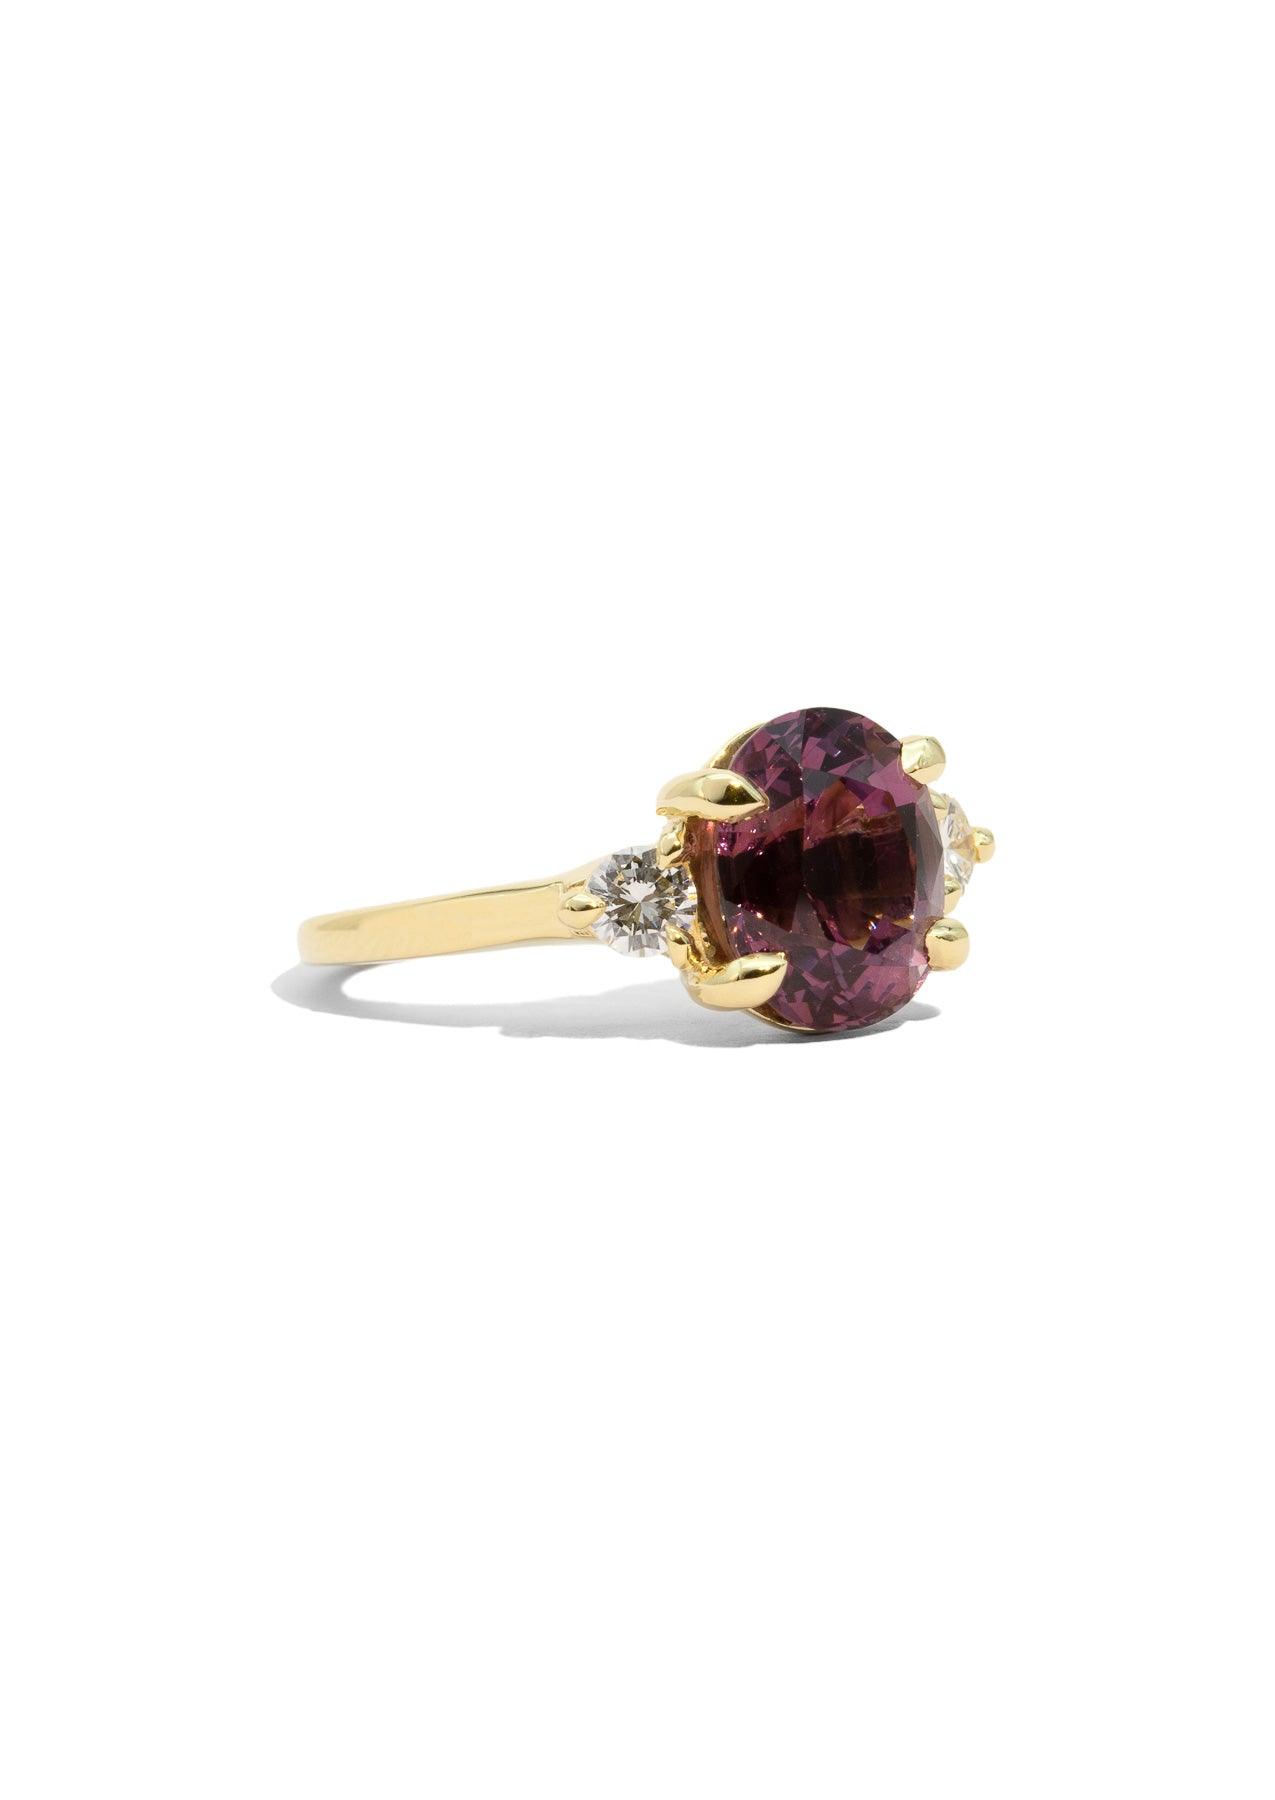 The Ada 4.5ct Plum Spinel Ring